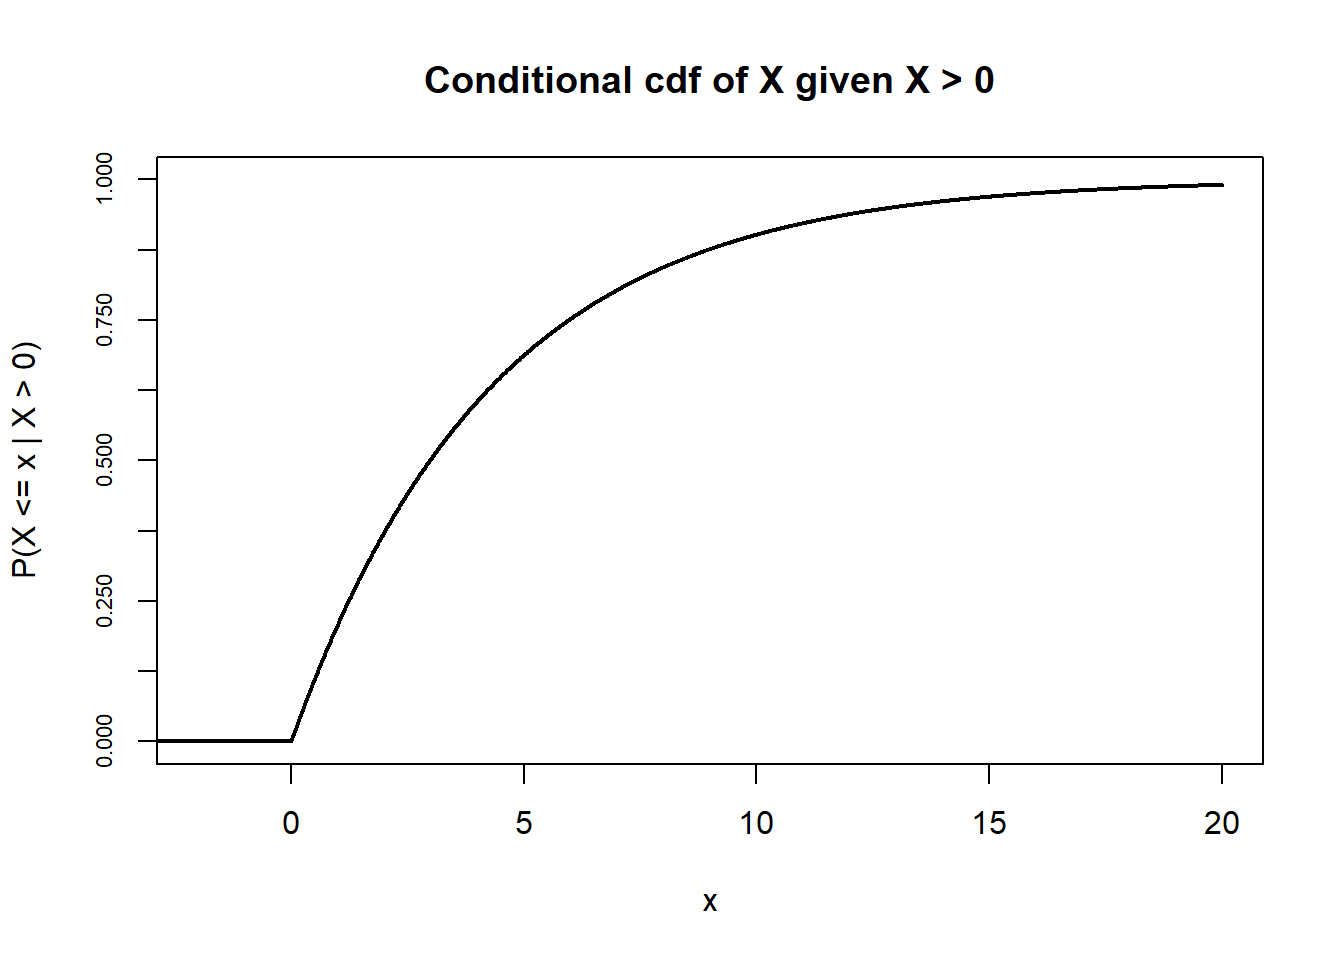 Illustration of the cdf of \(X\) (left) and the conditional cdf of \(X\) given \(X>0\) (right) in Example 4.20.